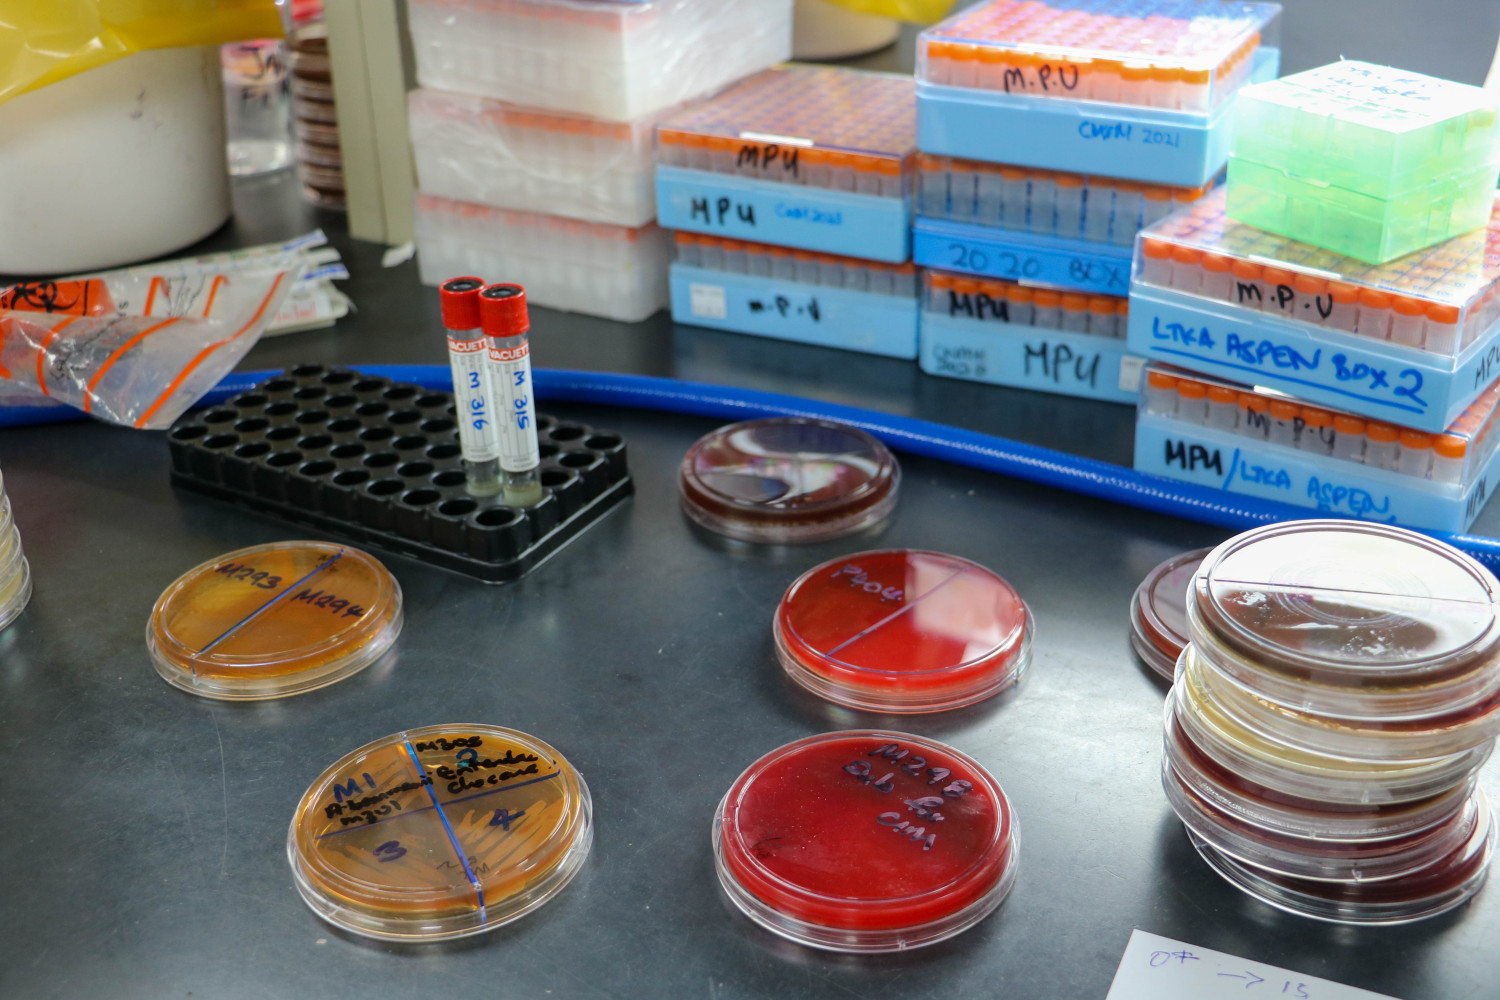 Plates used for the screening of AMR pathogens in the microbiology laboratory, Fiji